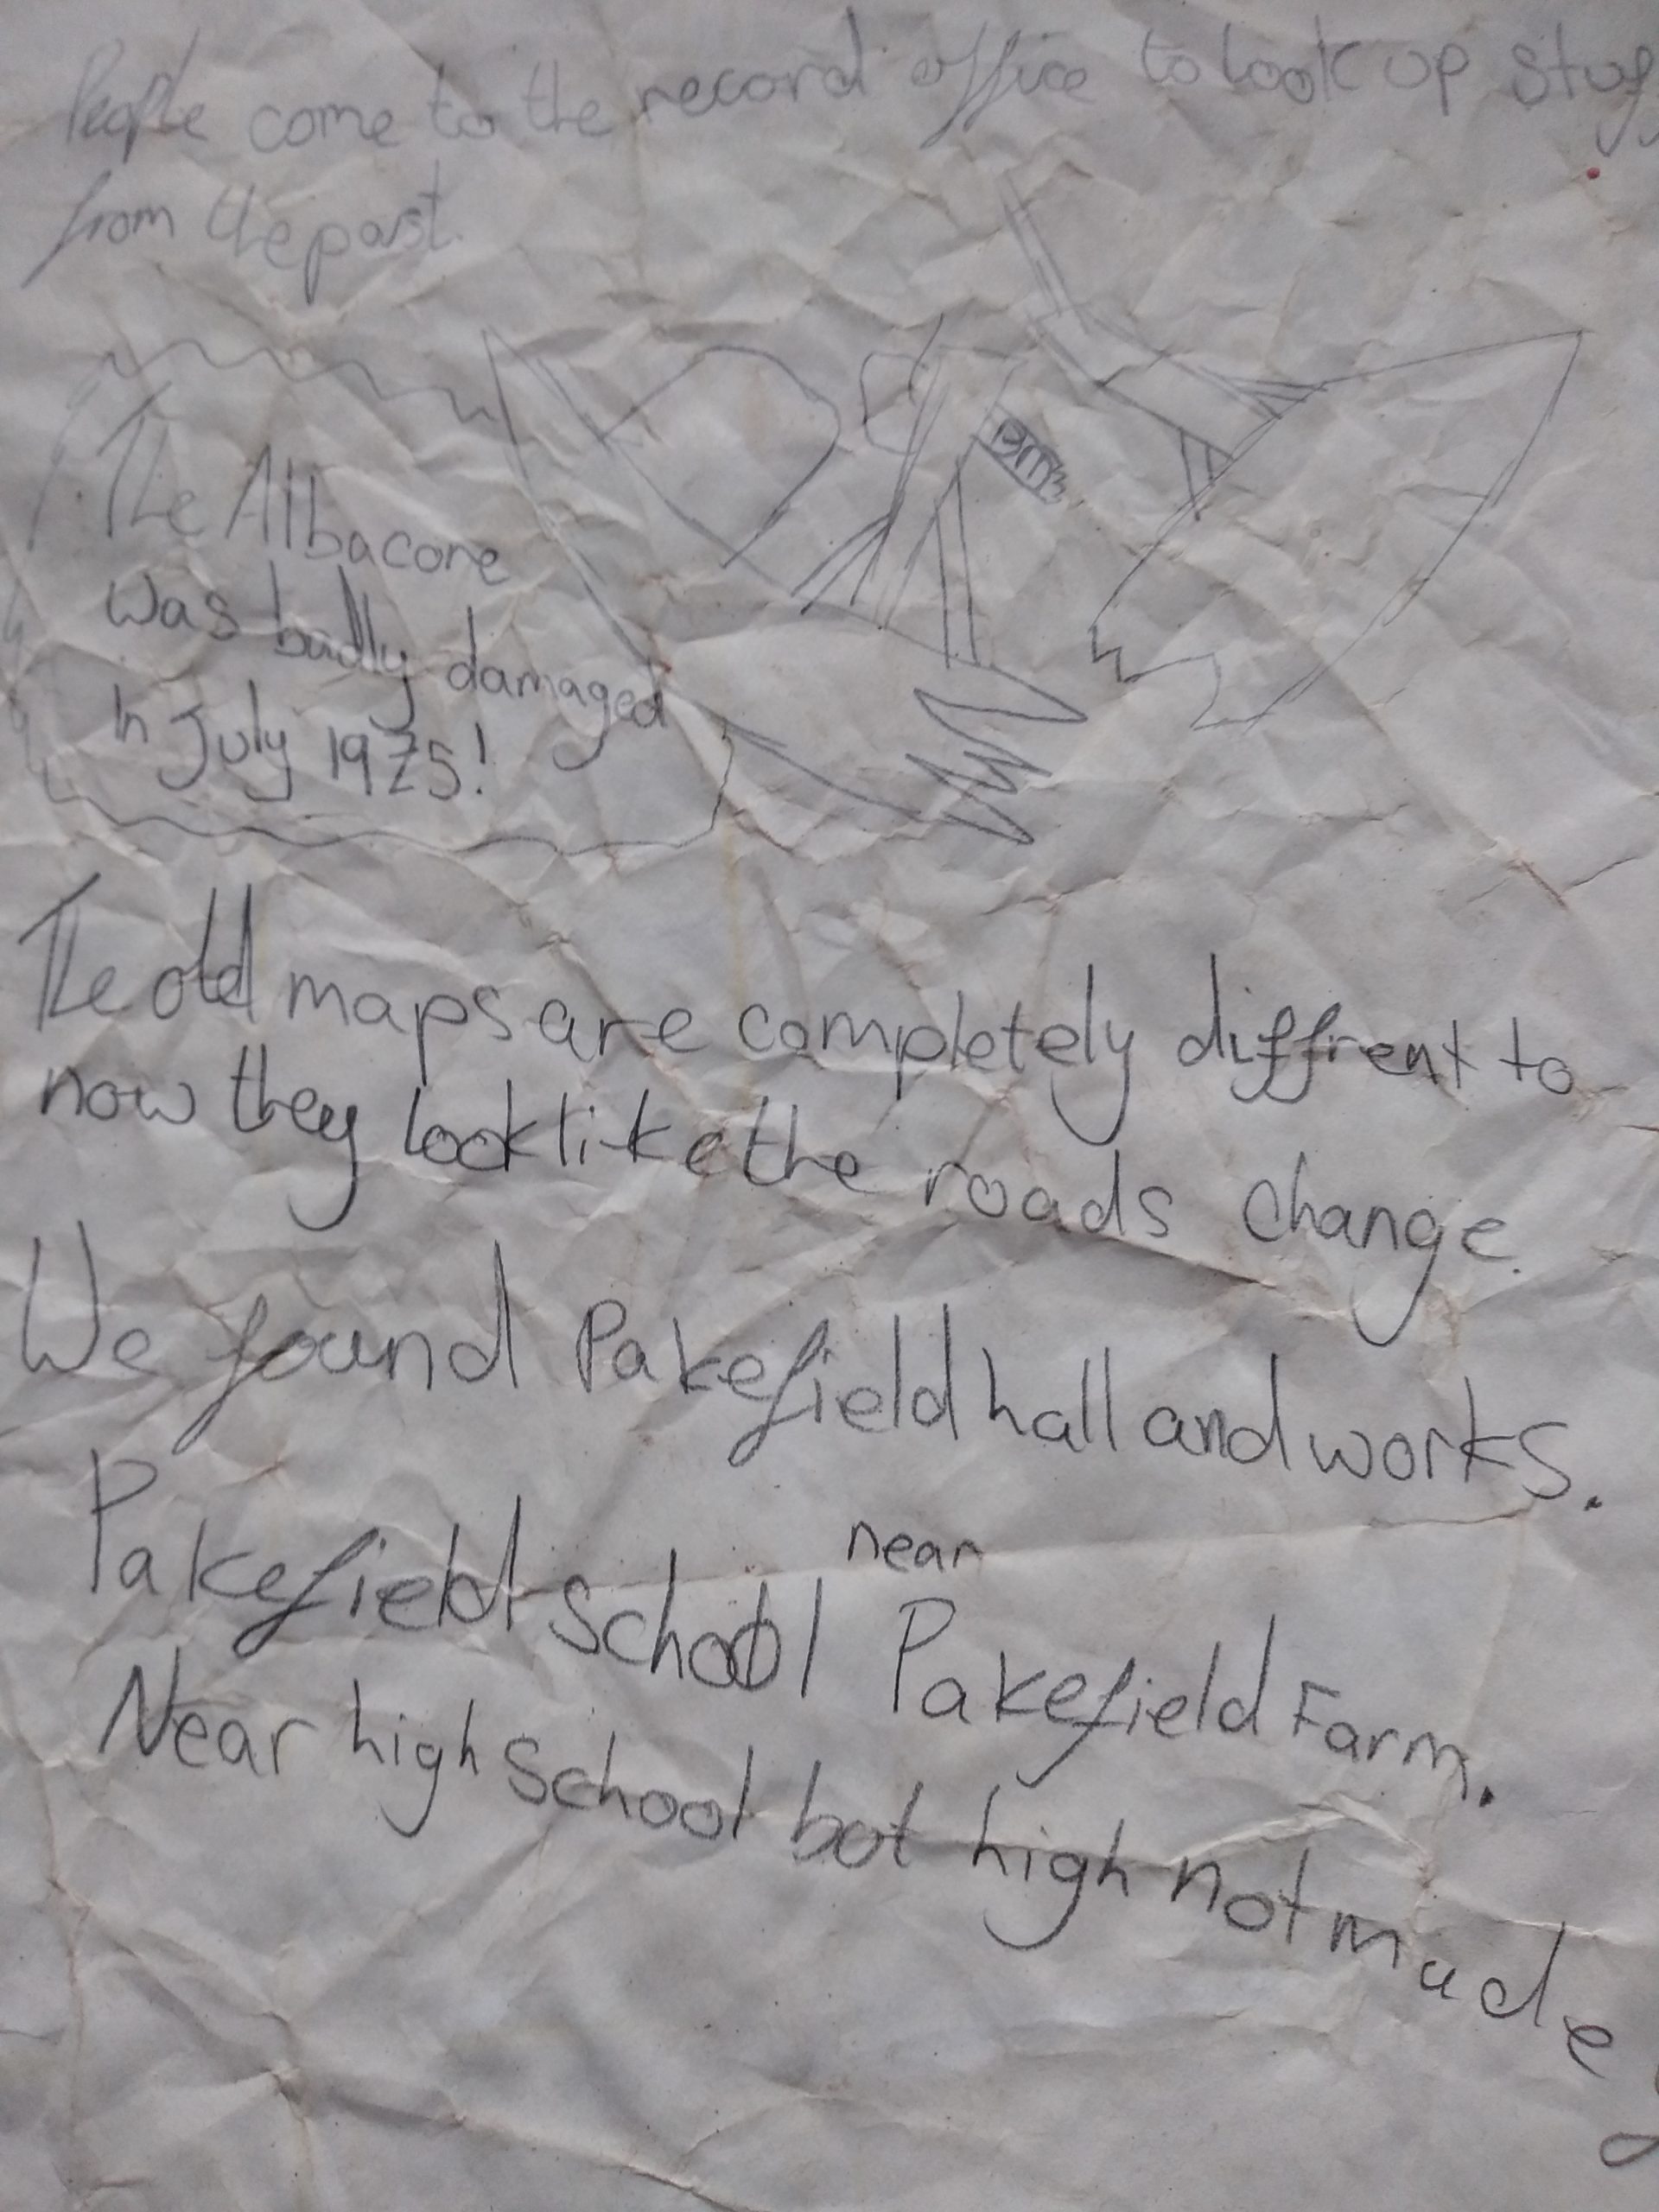 A crumpled sheet of paper with pencil drawing and writing